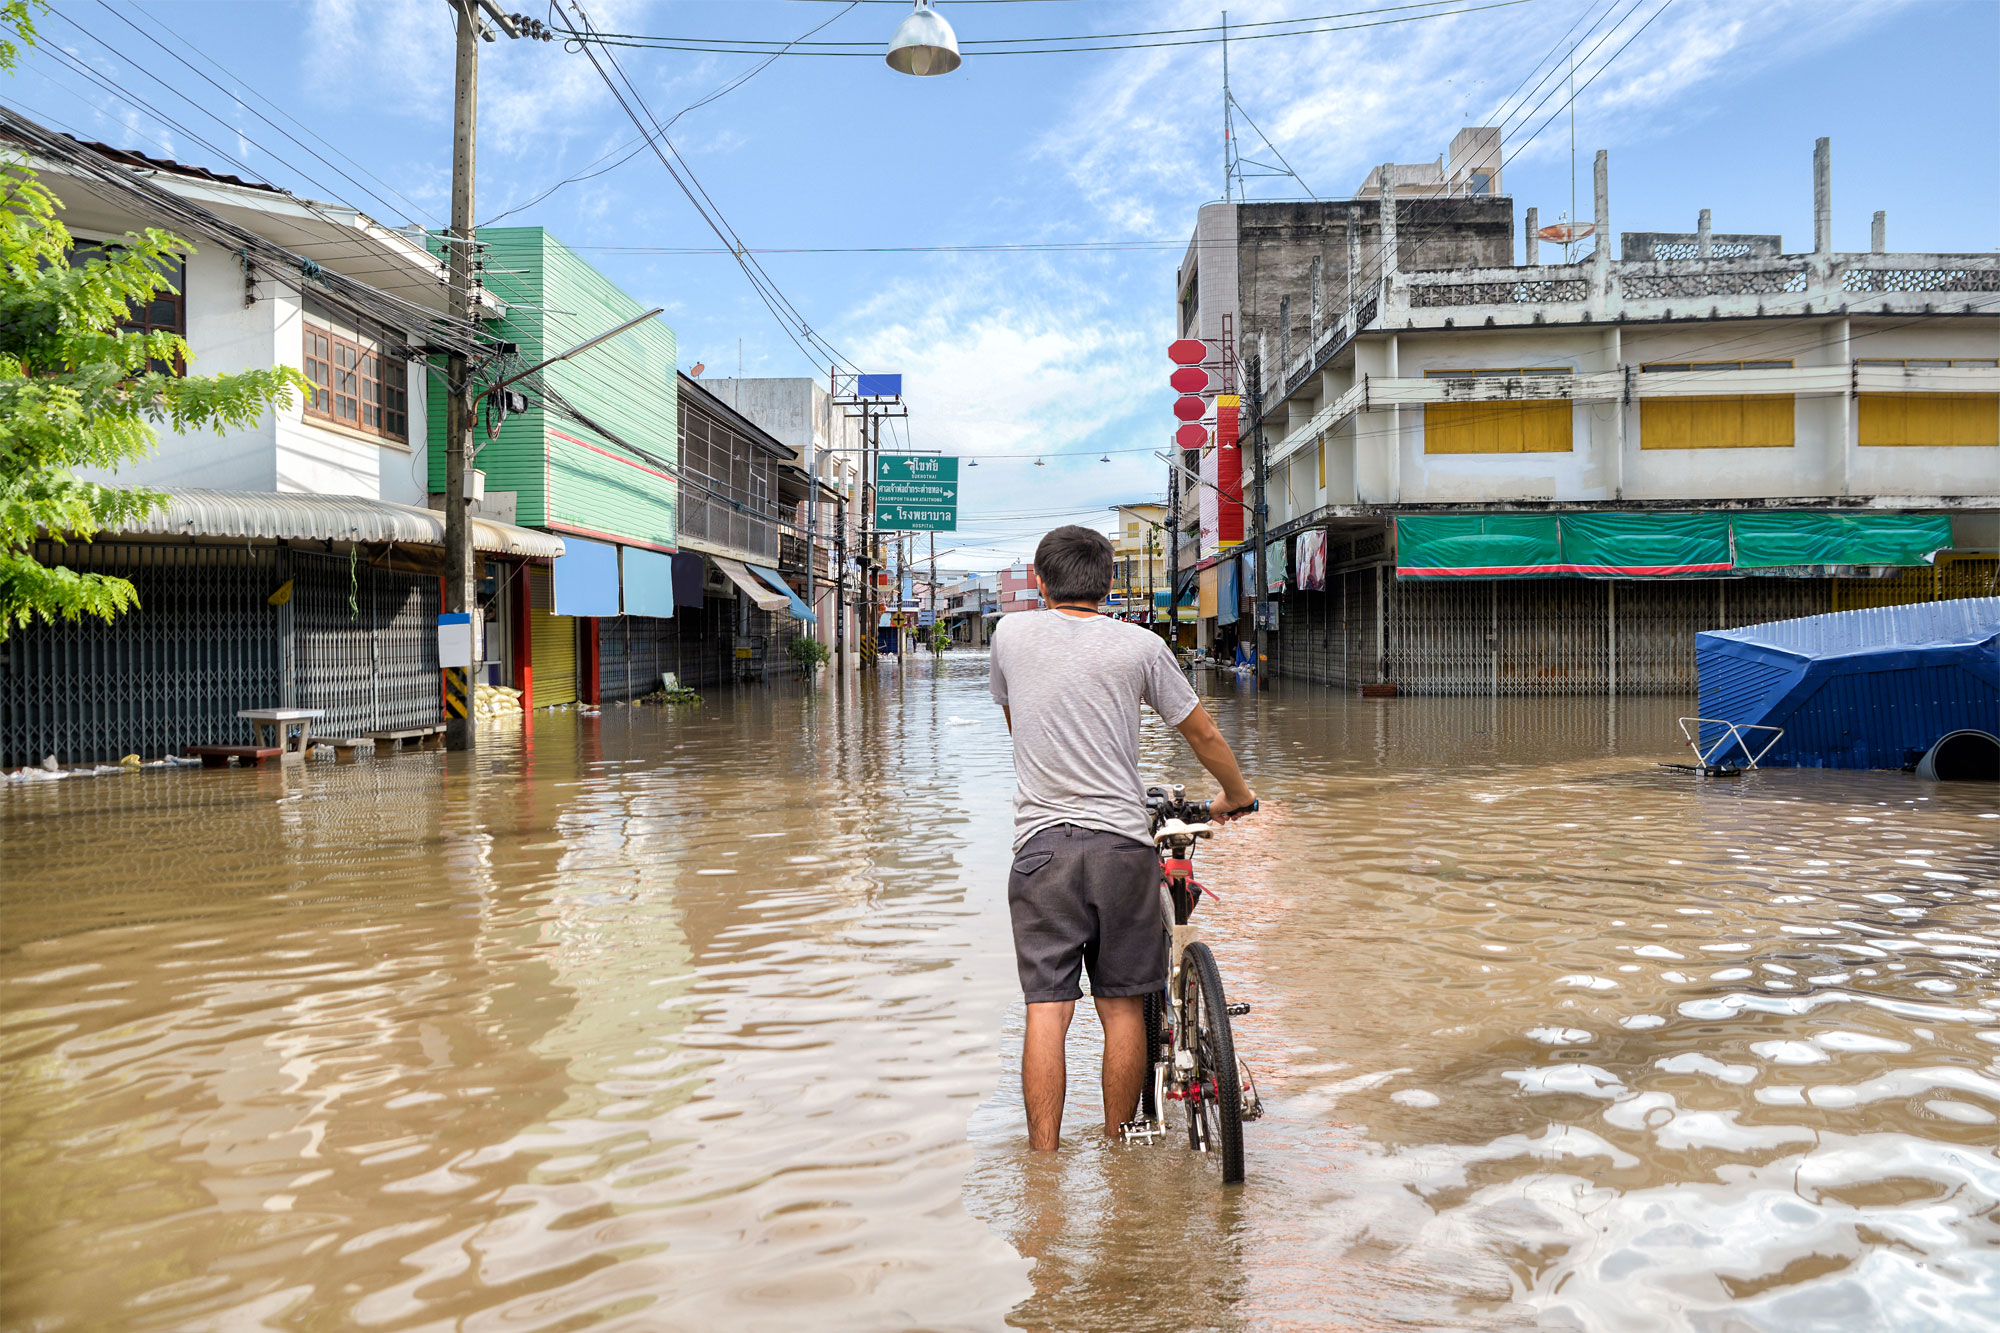 Man with bicycle standing in flooded crossroads in urban space